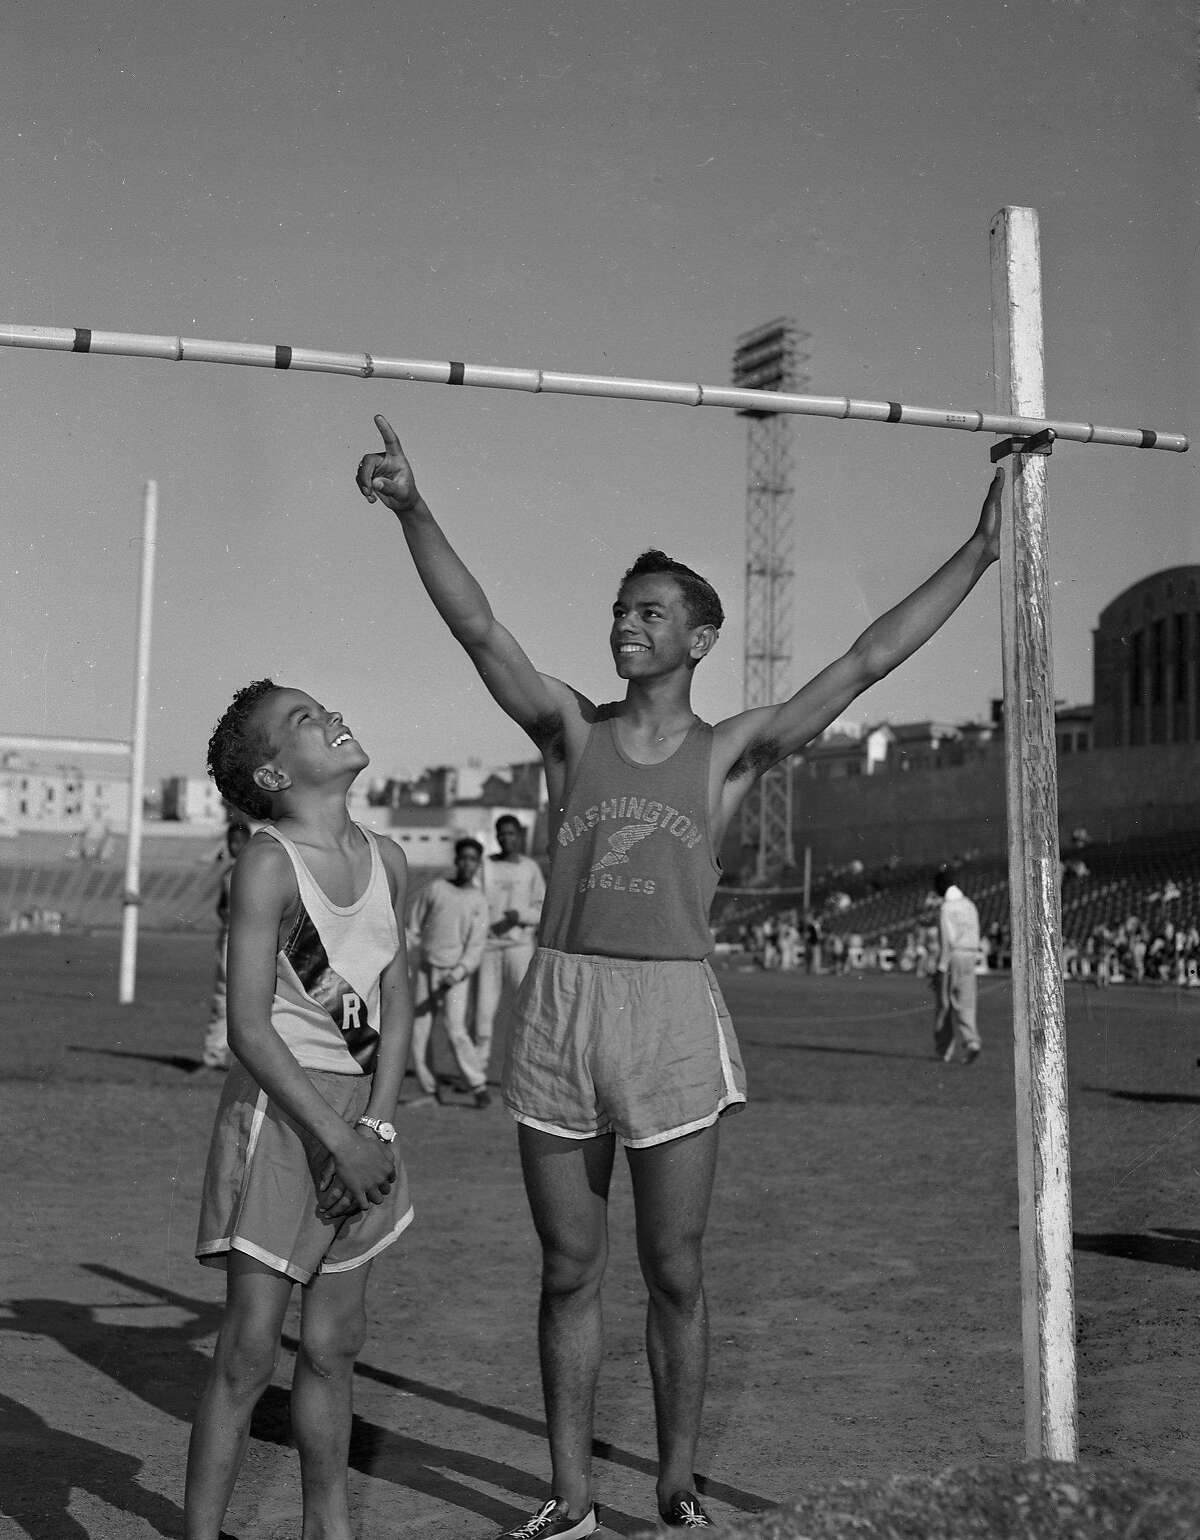 Johnny Mathis and his brother Ralph Mathis inspecting the bar for a try at the high jump at Kezar stadium 04/18/1953 From the negative .. photographer not identified